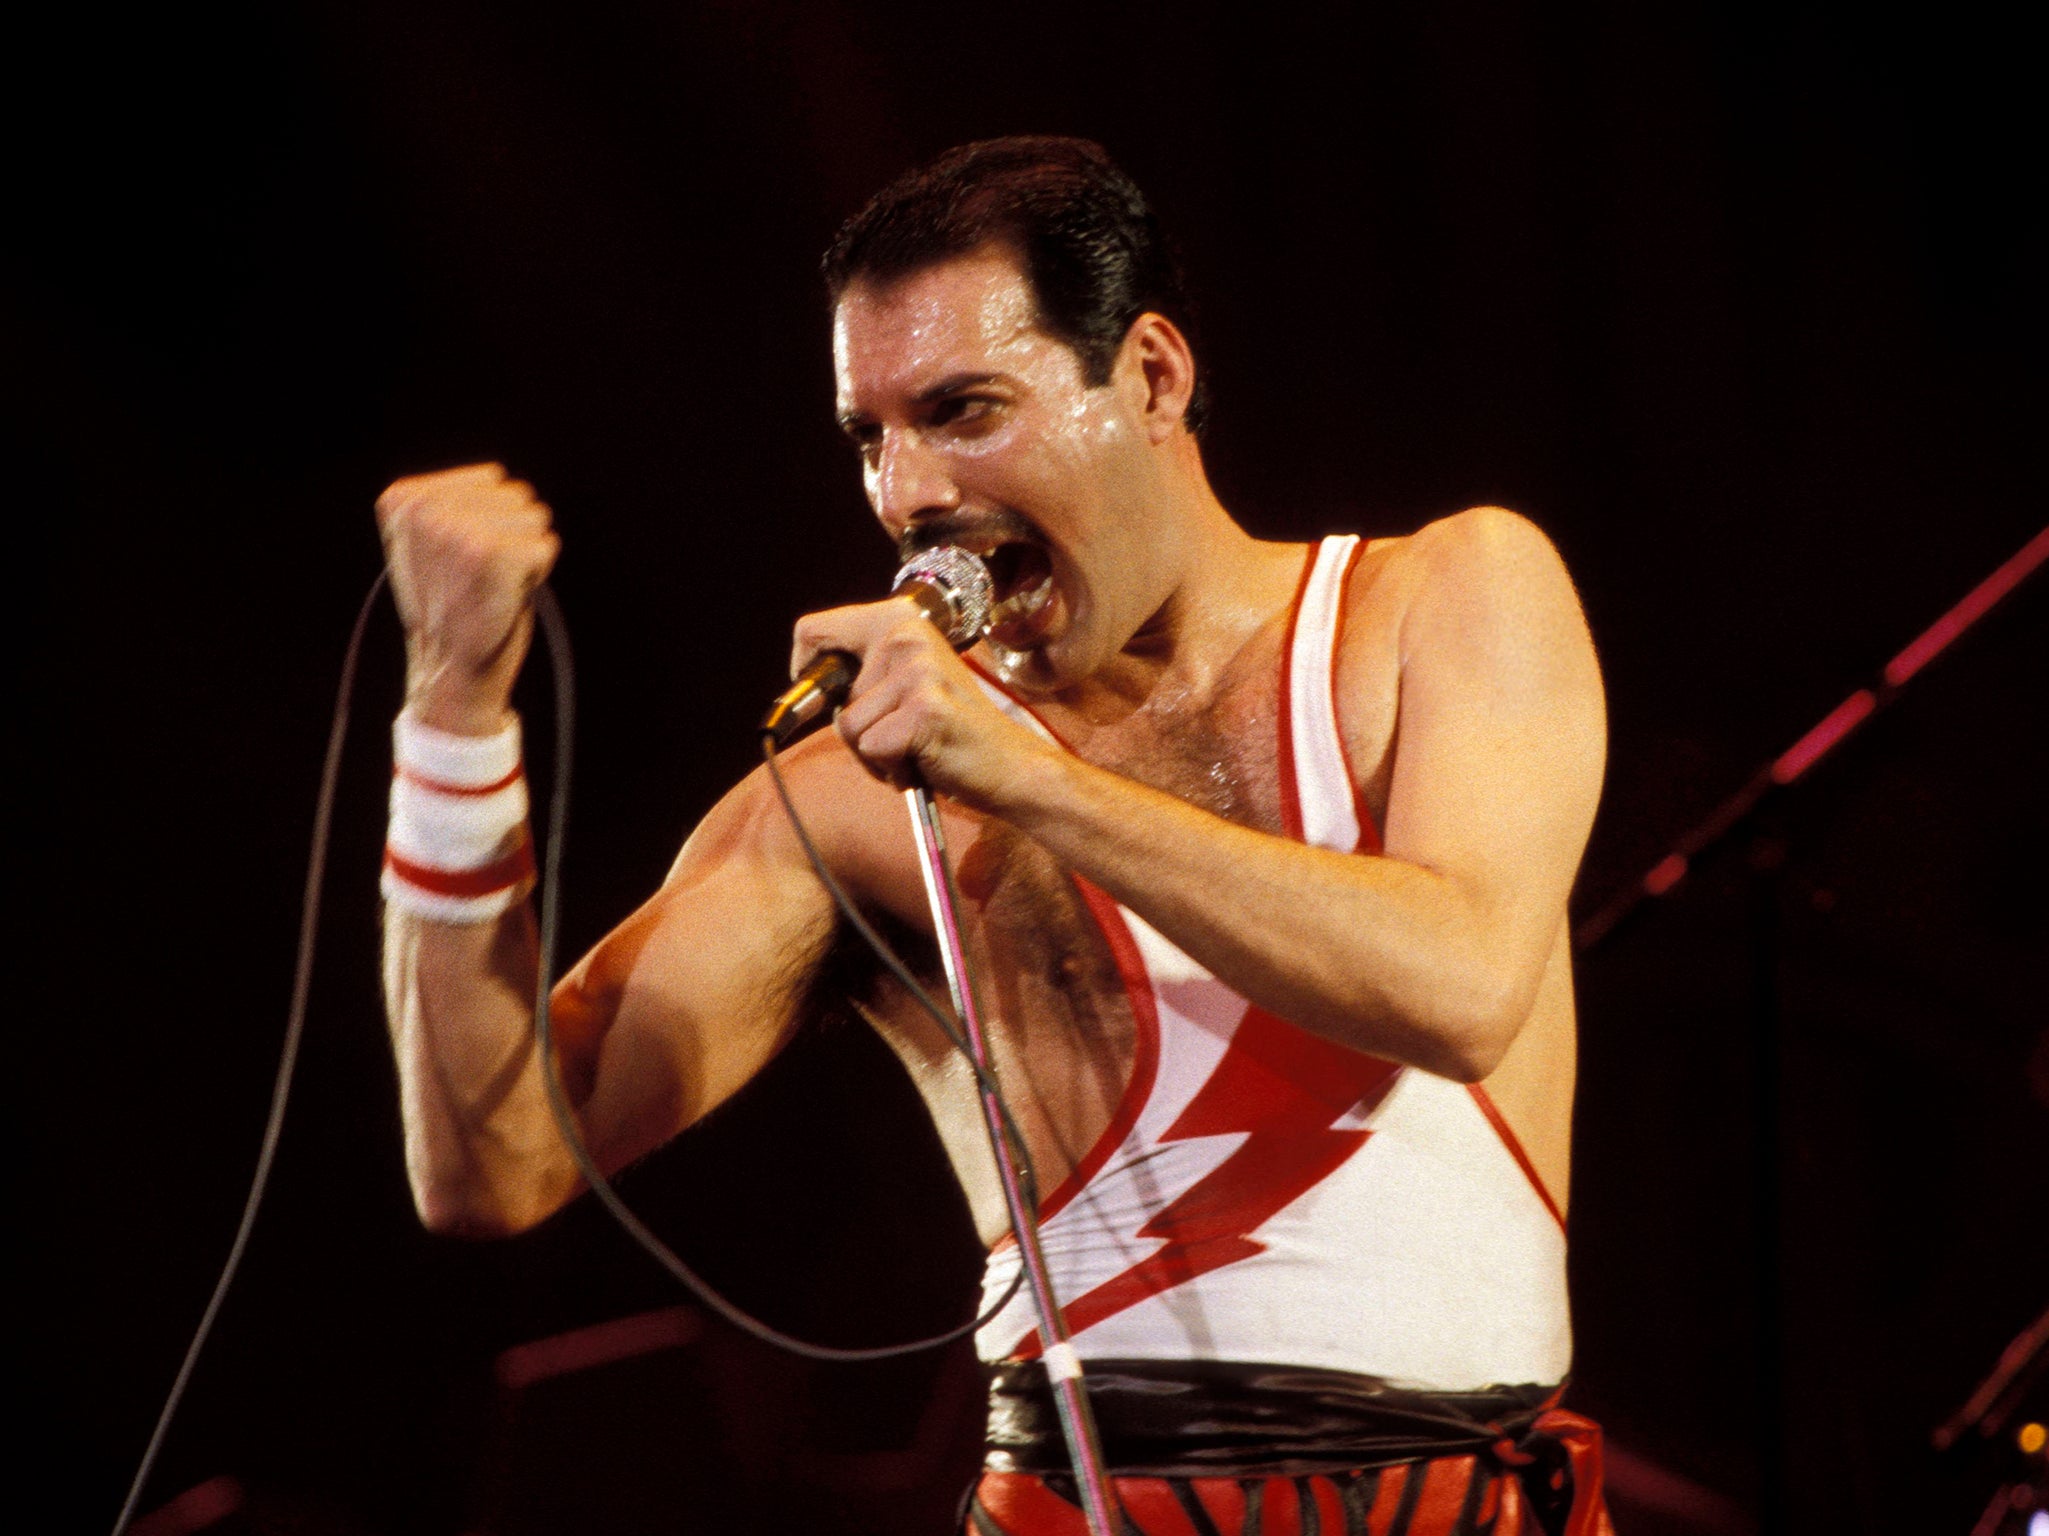 <p>‘He didn’t want to go through the misery of being the object of pity’: Freddie Mercury in concert</p>